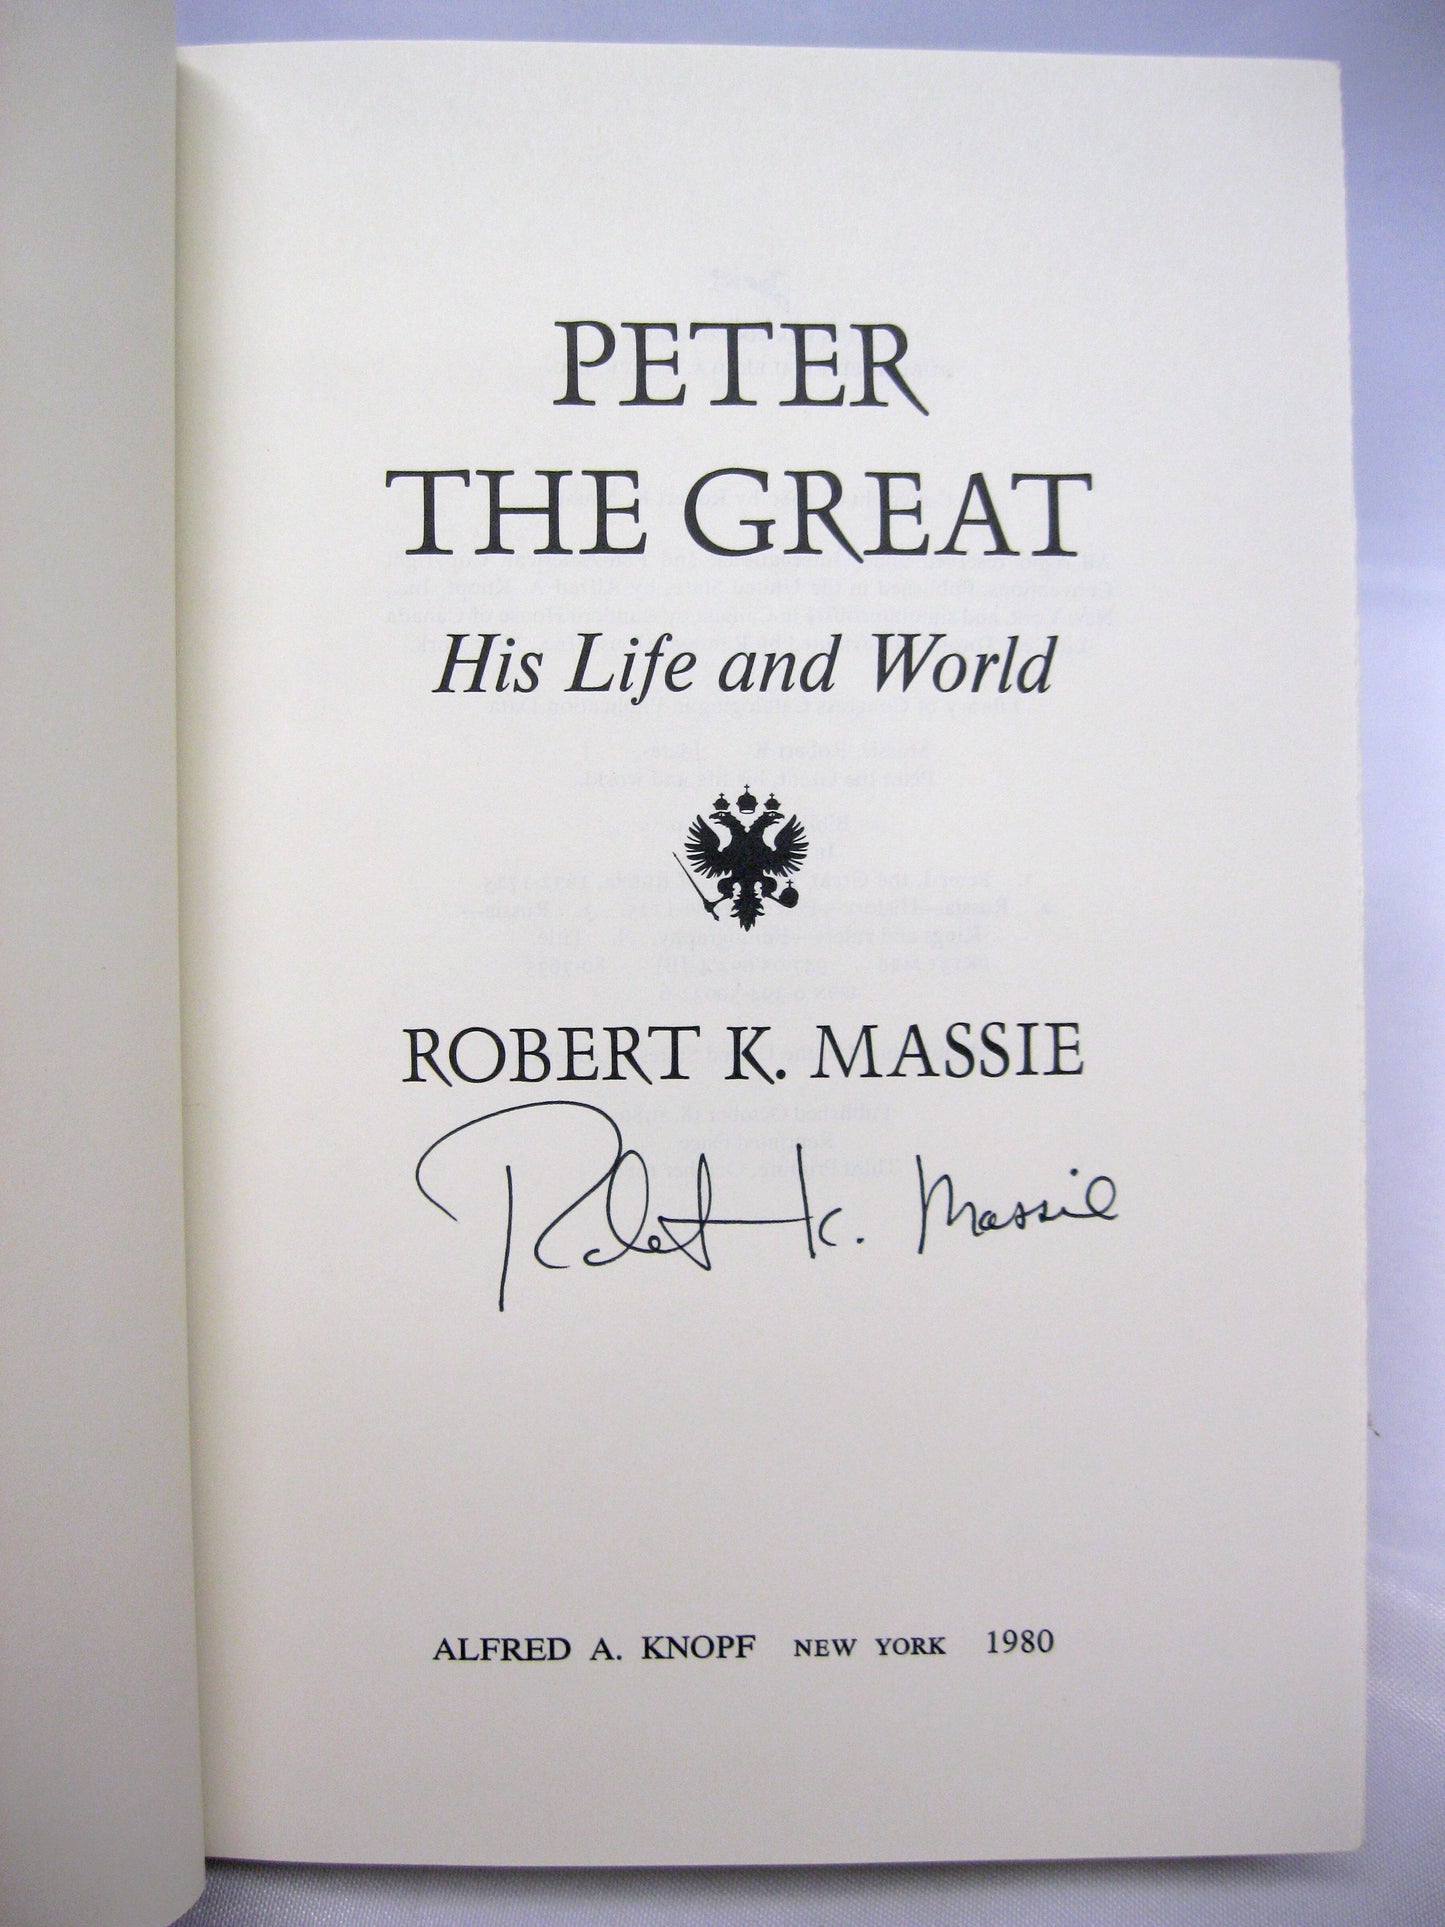 Peter the Great by Robert K. Massie